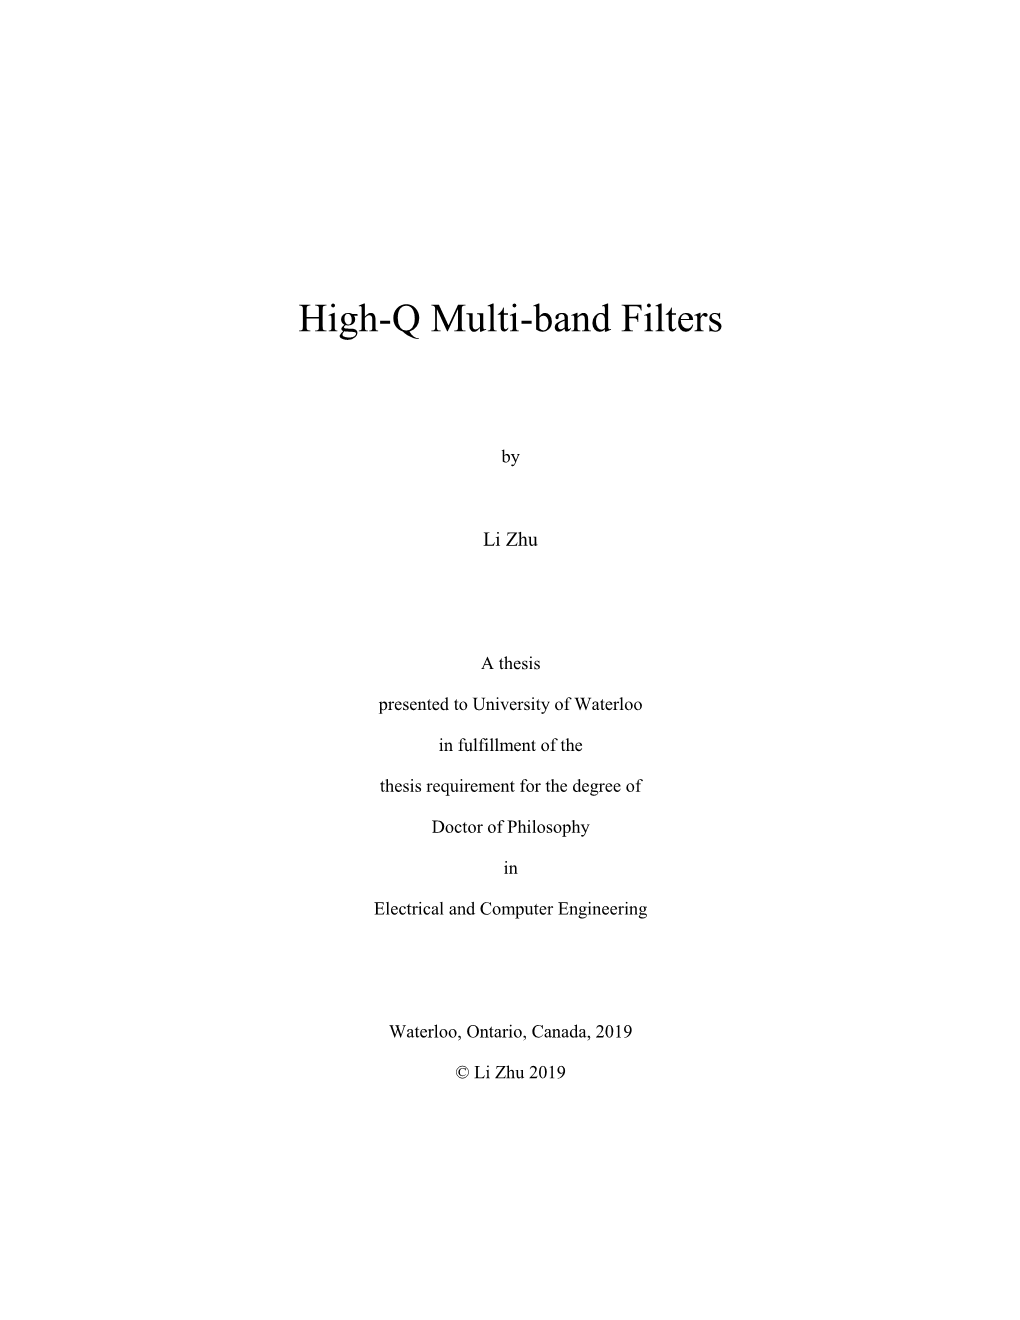 High-Q Multi-Band Filters